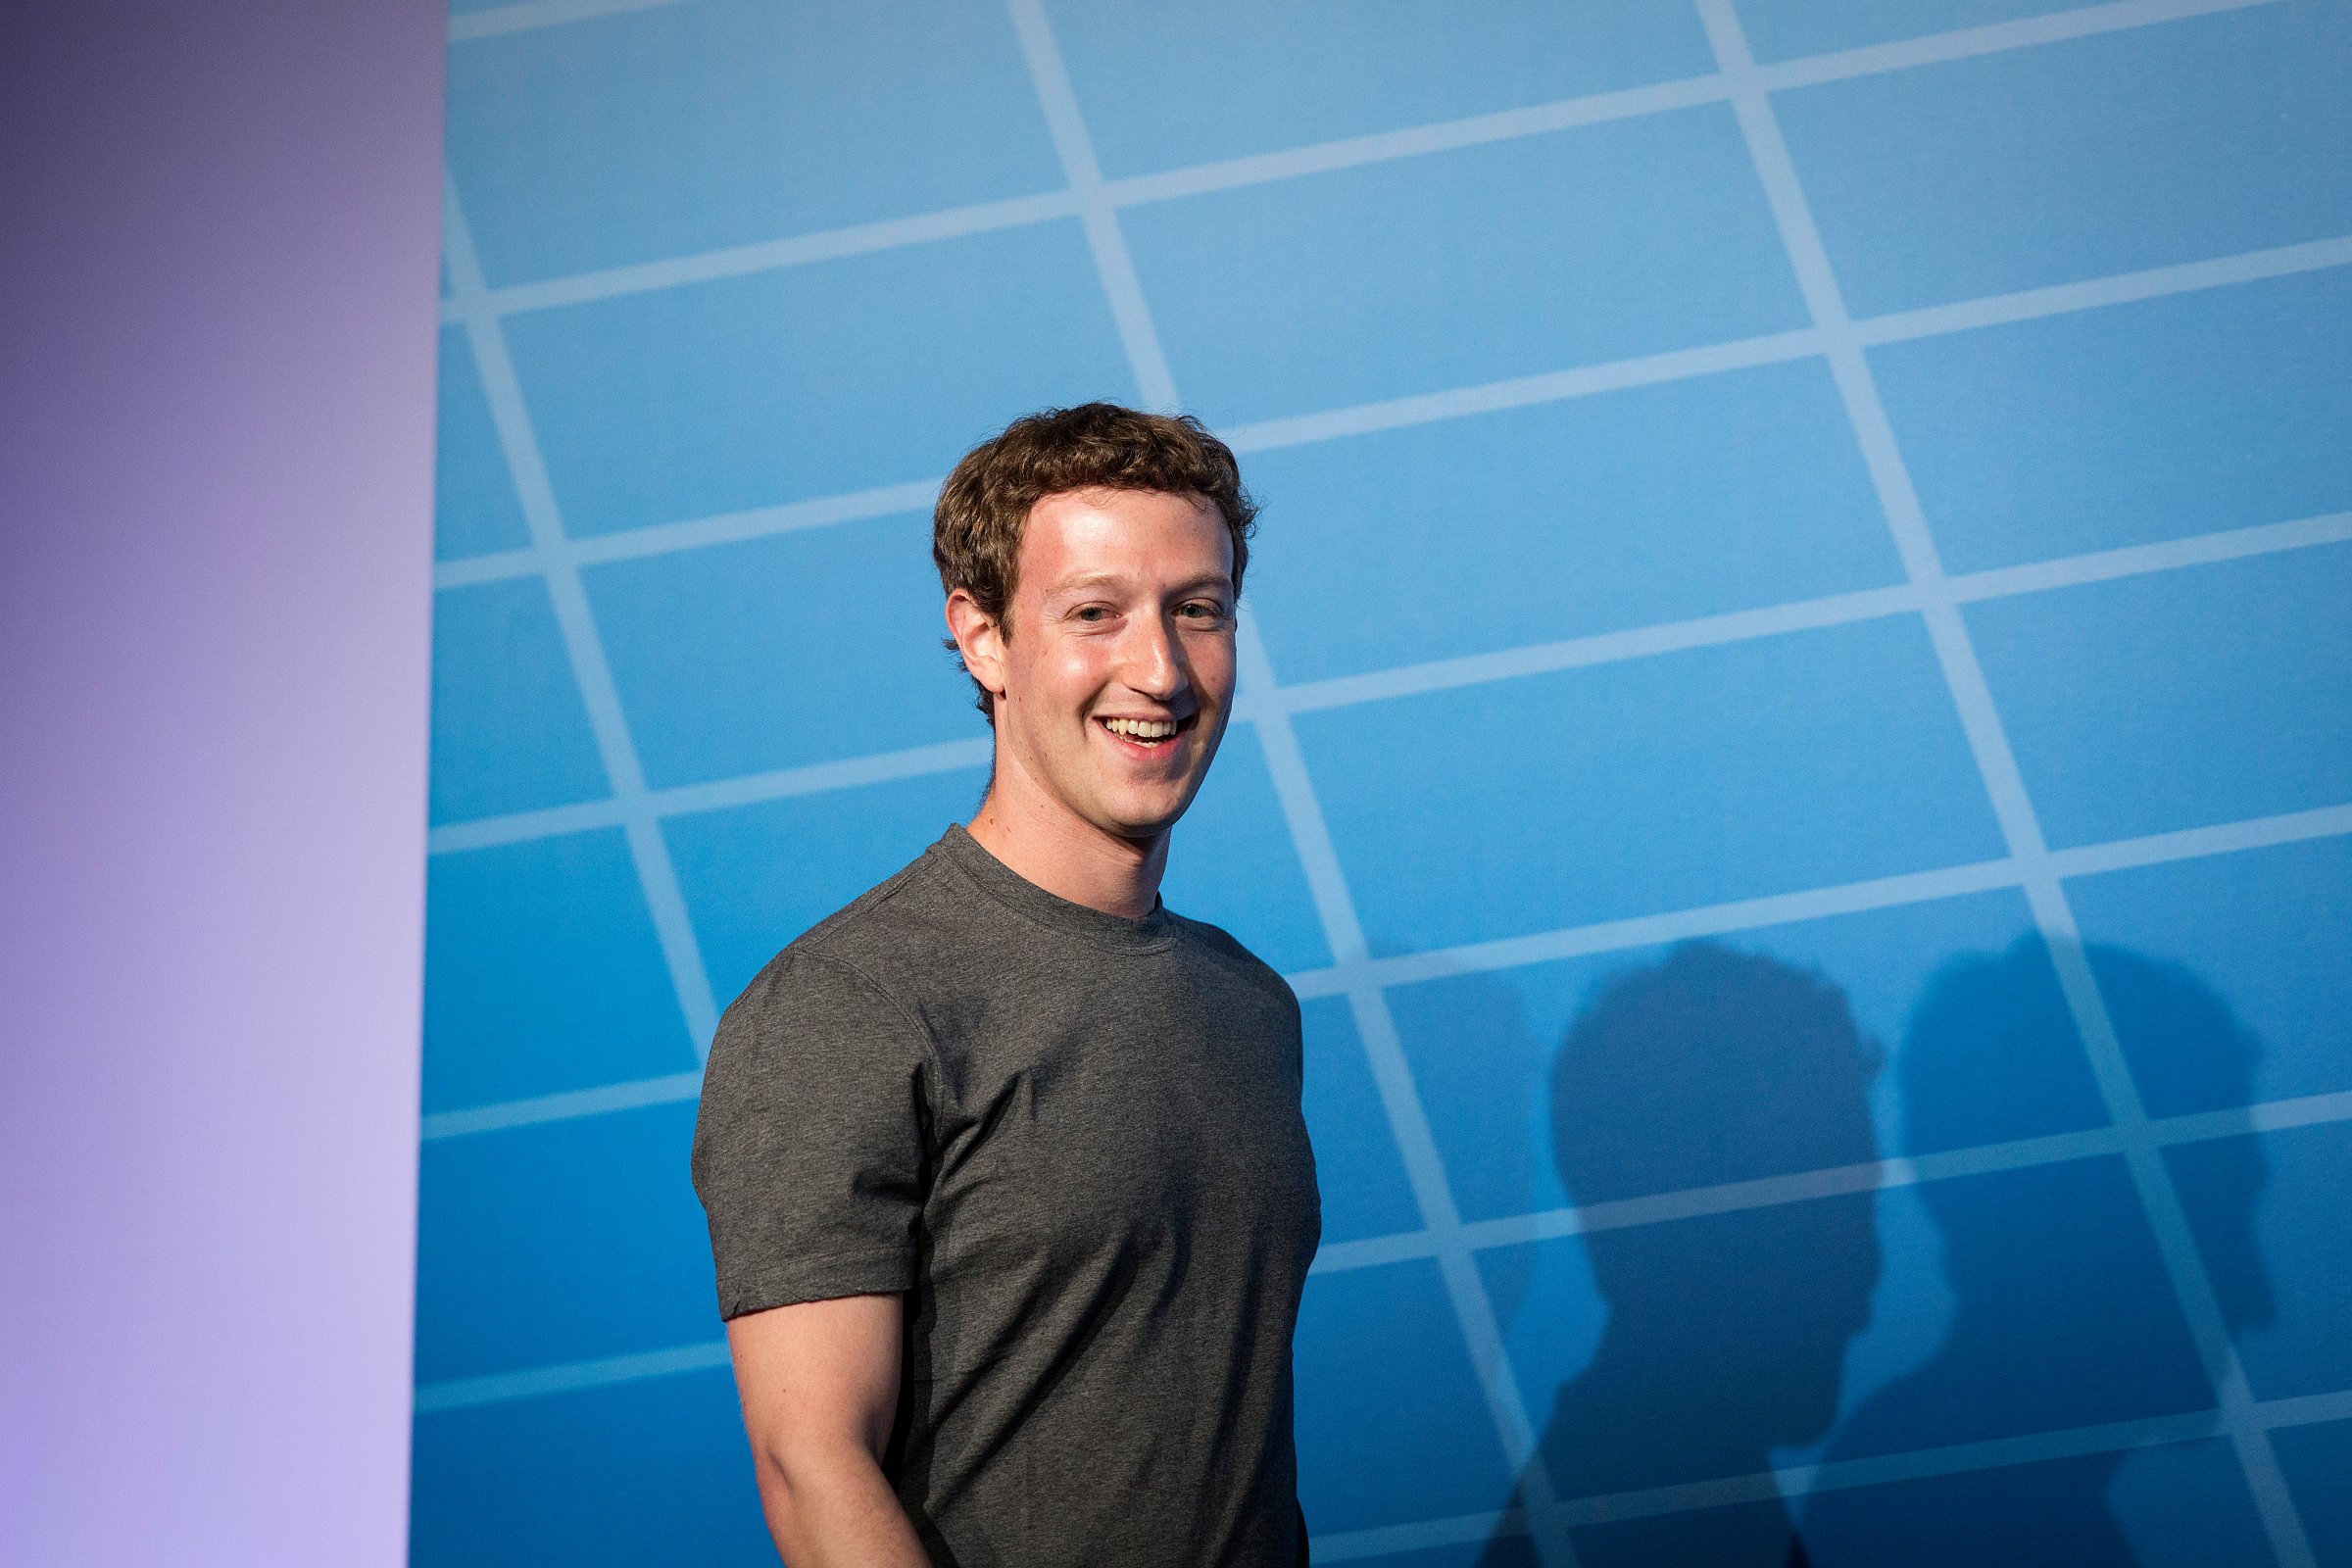 Mark Zuckerberg arrives for a keynote session on the opening day of the Mobile World Congress in Barcelona, Feb. 24, 2014.